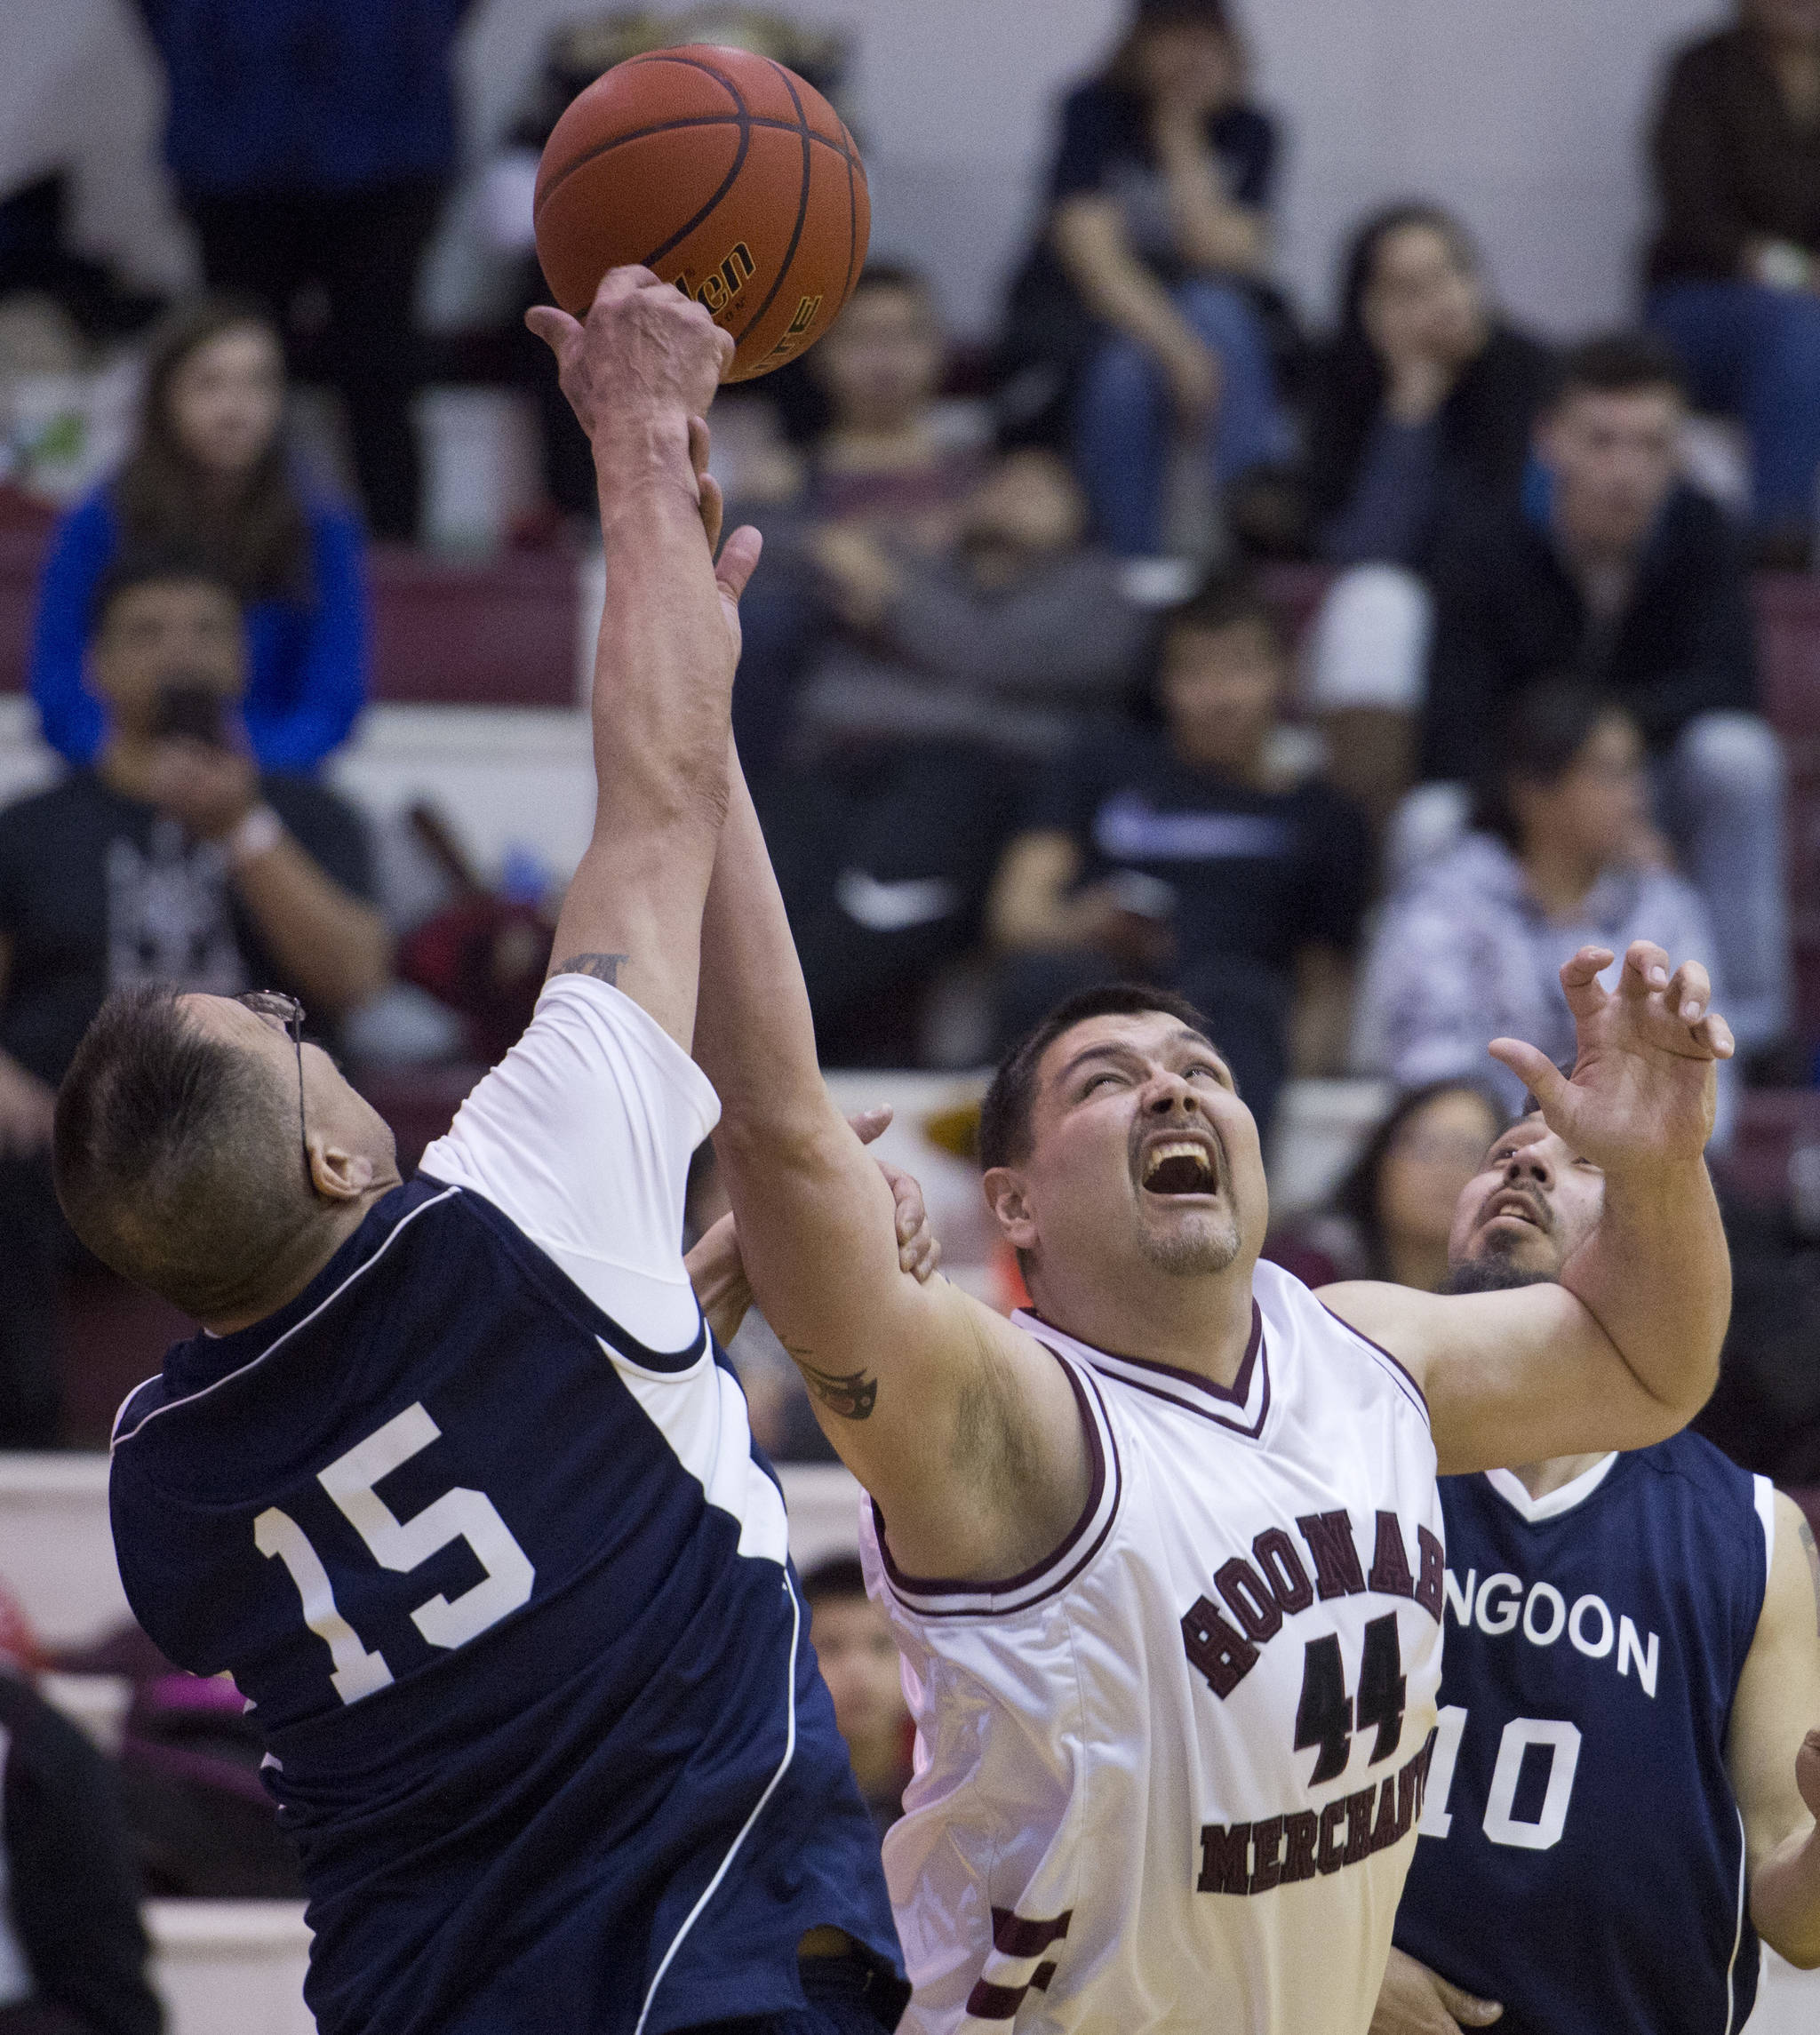 Angoon’s Randy Gamble, left, and Hoonah’s Mike Miles compete for a rebound in their Masters Bracket game in the Lions Club’s Gold Medal Basketball Tournament at Juneau-Douglas High School on Thursday. (Michael Penn | Juneau Empire)